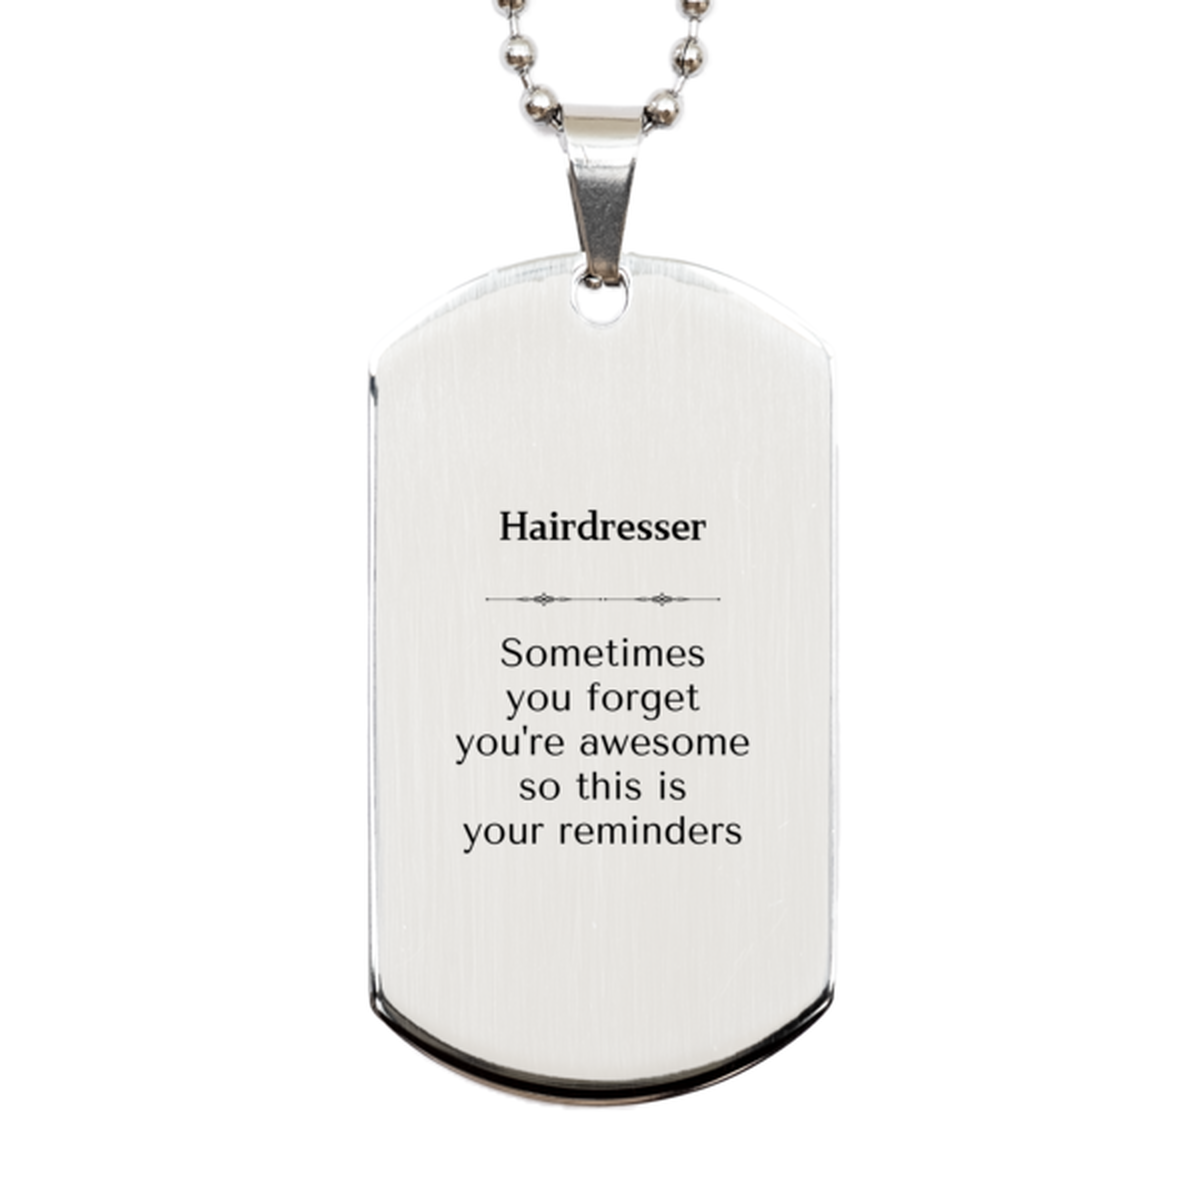 Sentimental Hairdresser Silver Dog Tag, Hairdresser Sometimes you forget you're awesome so this is your reminders, Graduation Christmas Birthday Gifts for Hairdresser, Men, Women, Coworkers